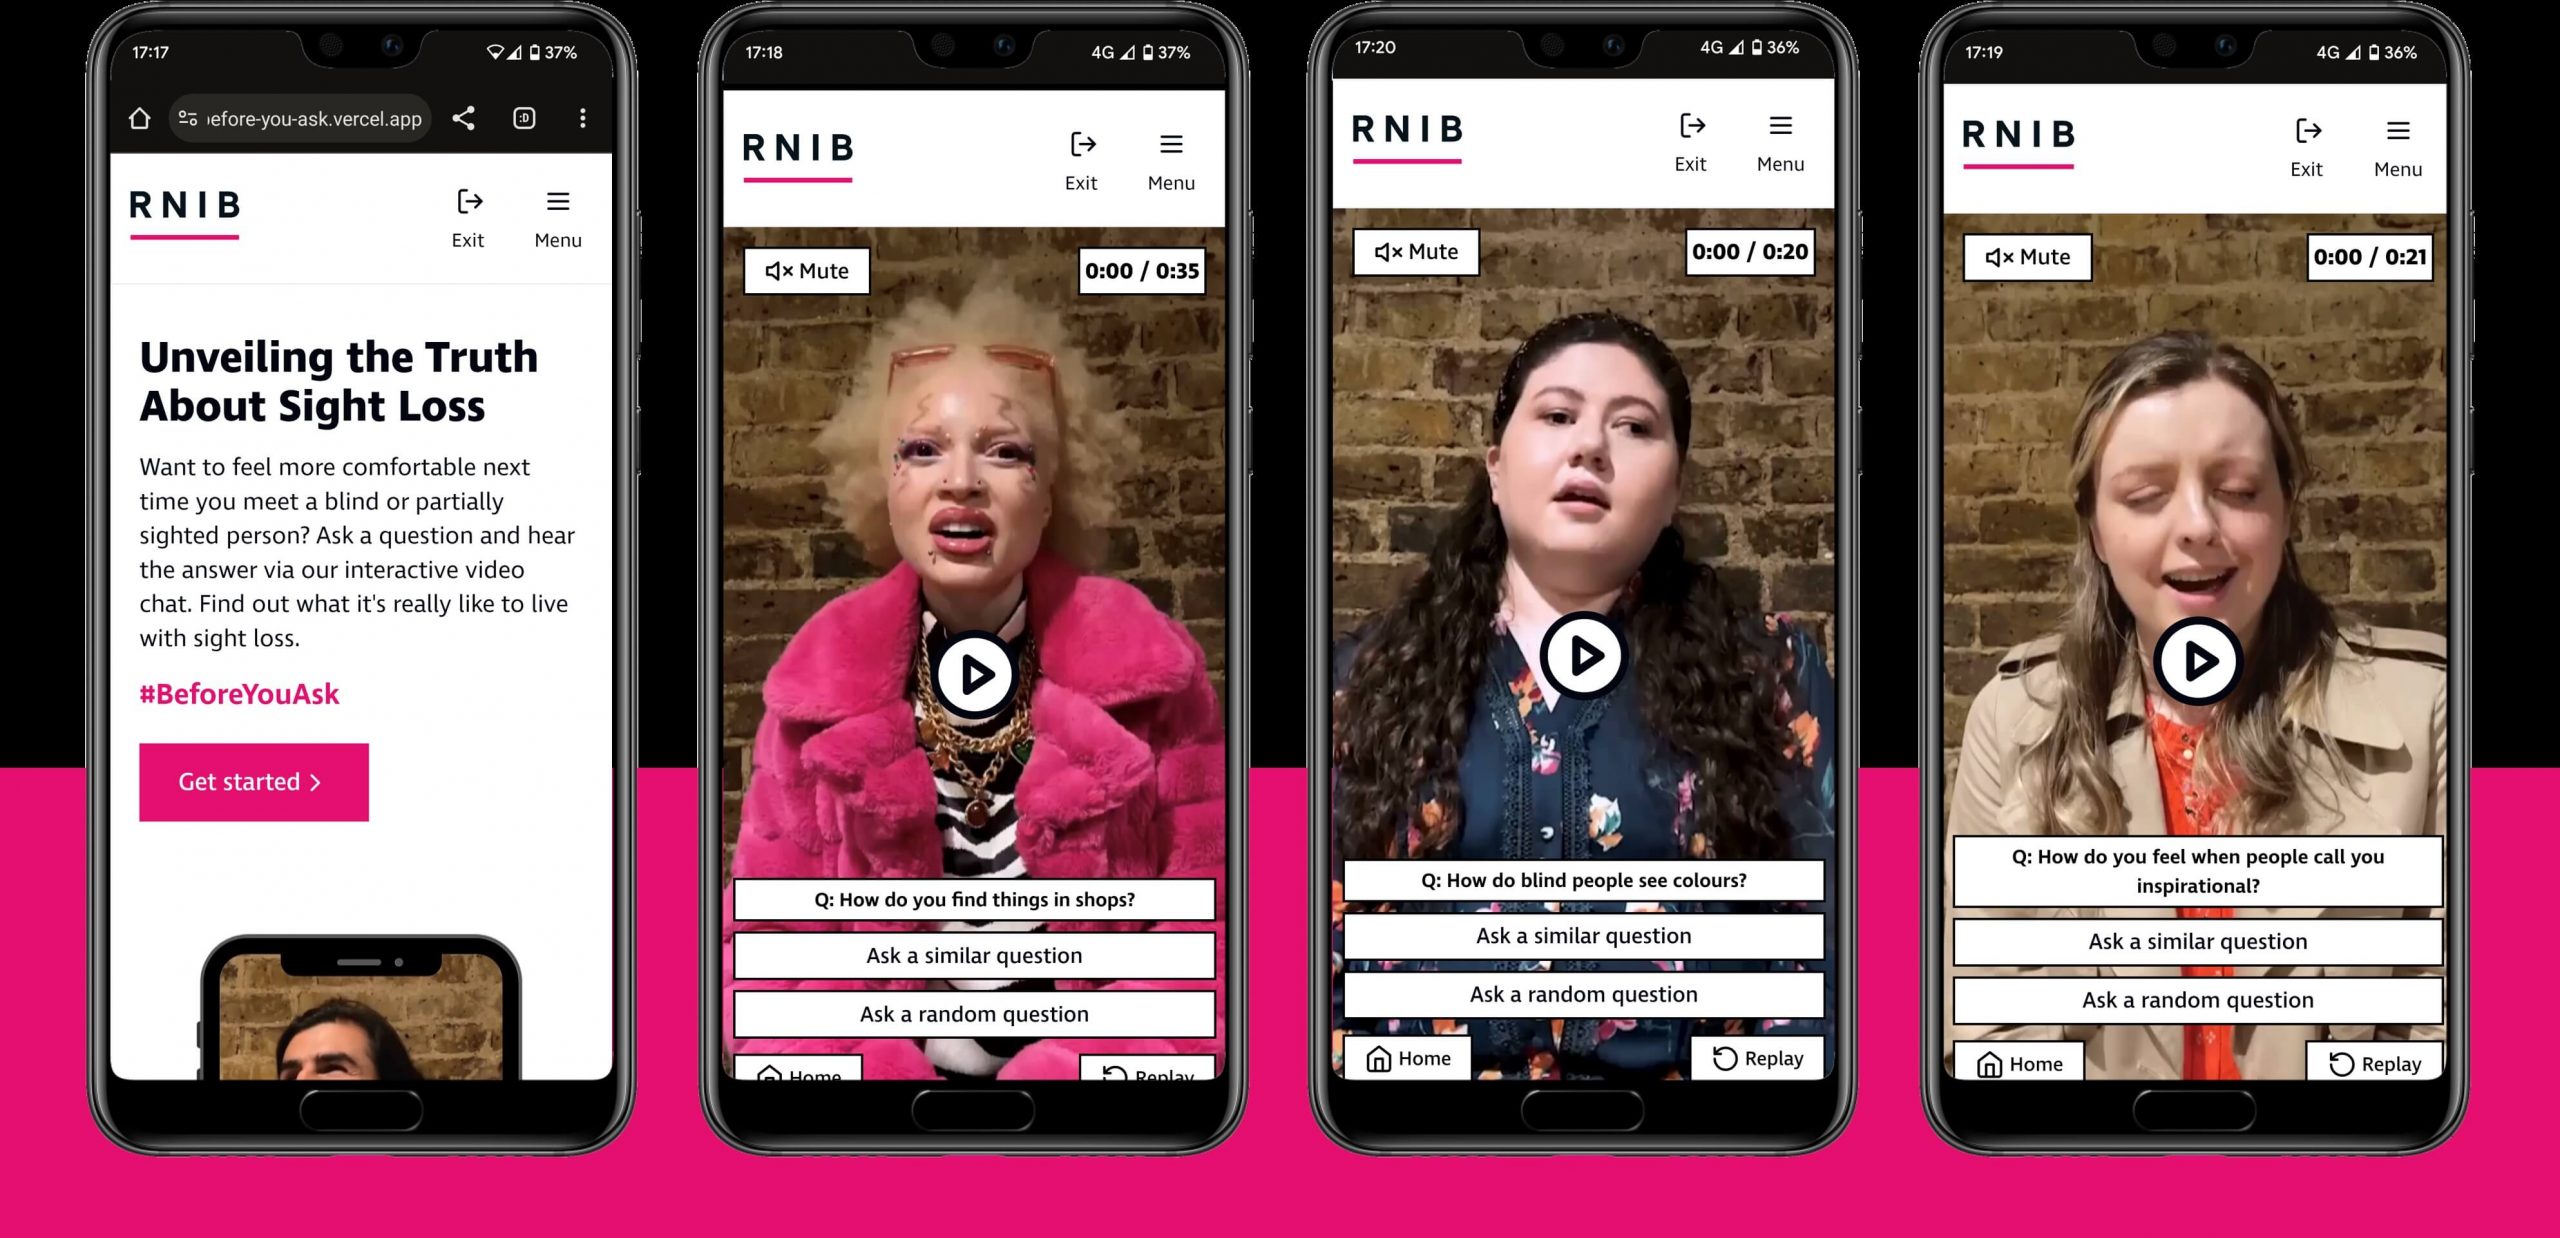 RNIB launches #BeforeYouAsk interactive video chat experience